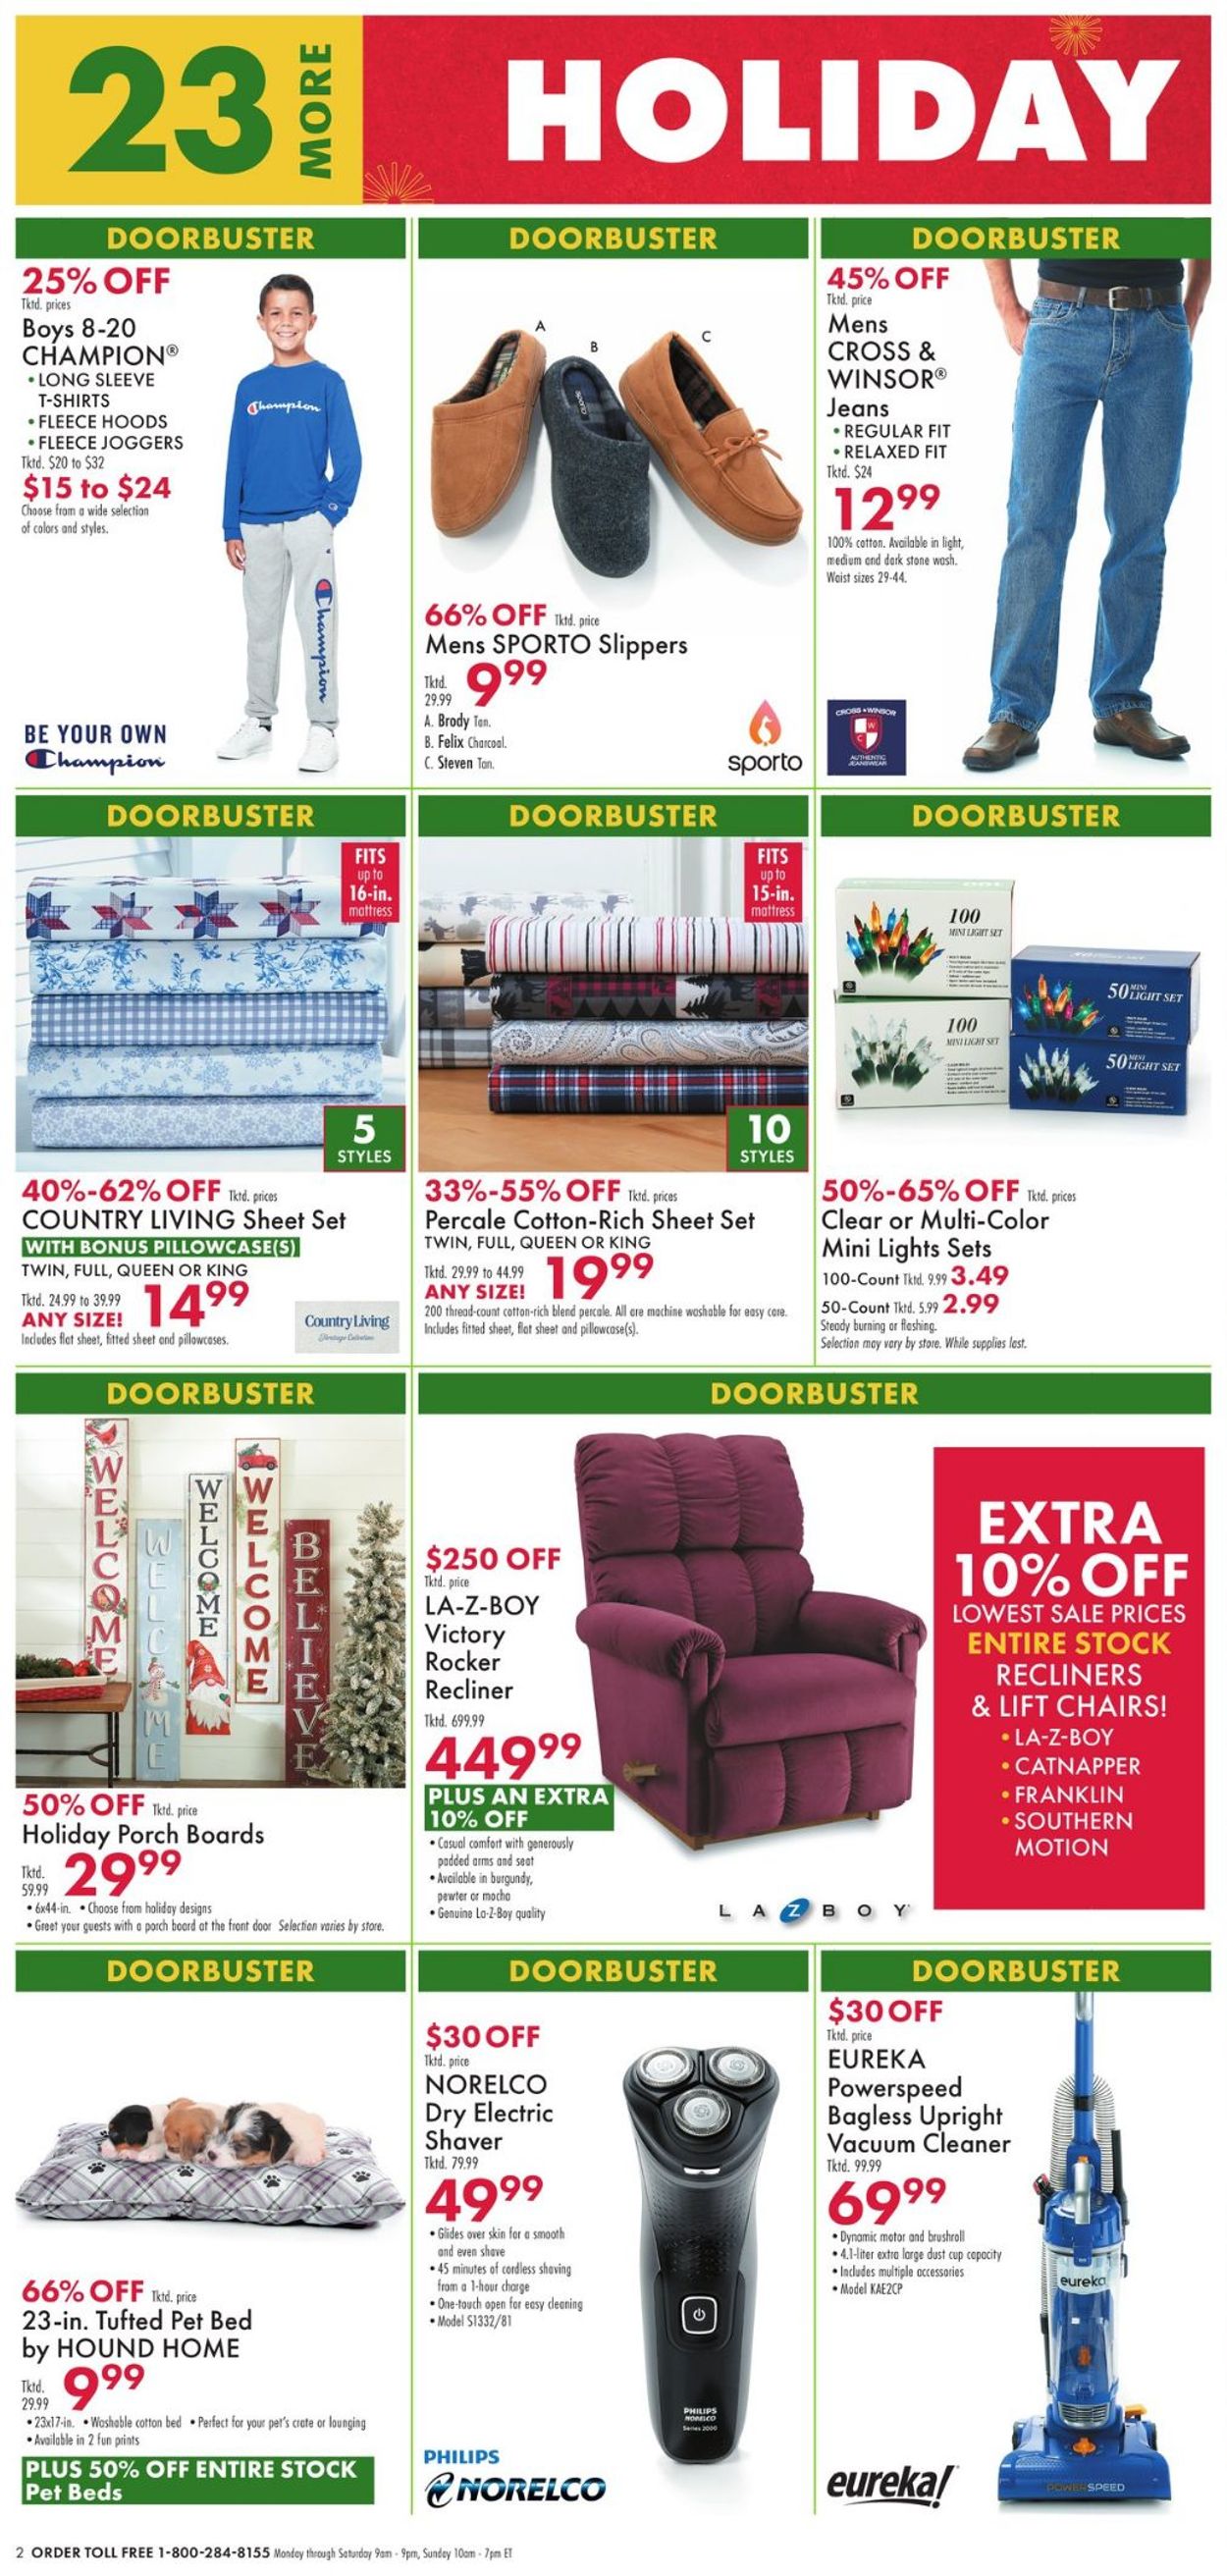 Boscov's Ad from 12/02/2021